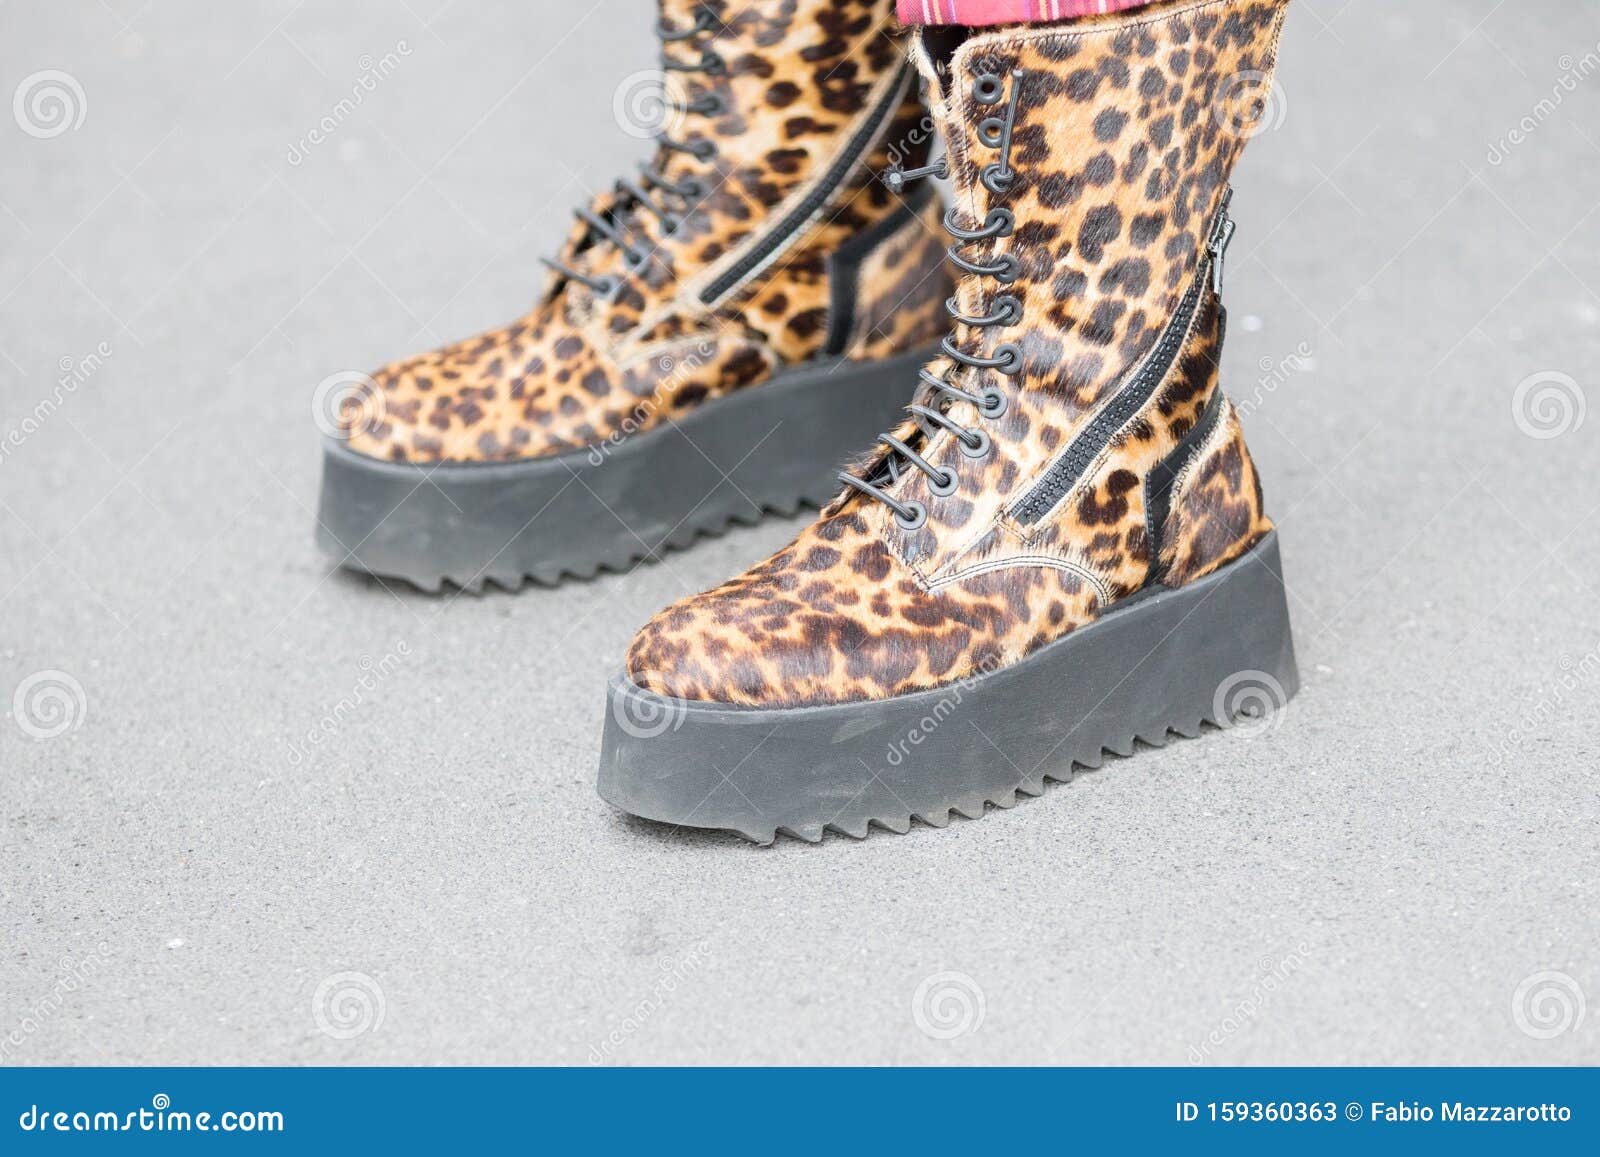 very leopard print boots